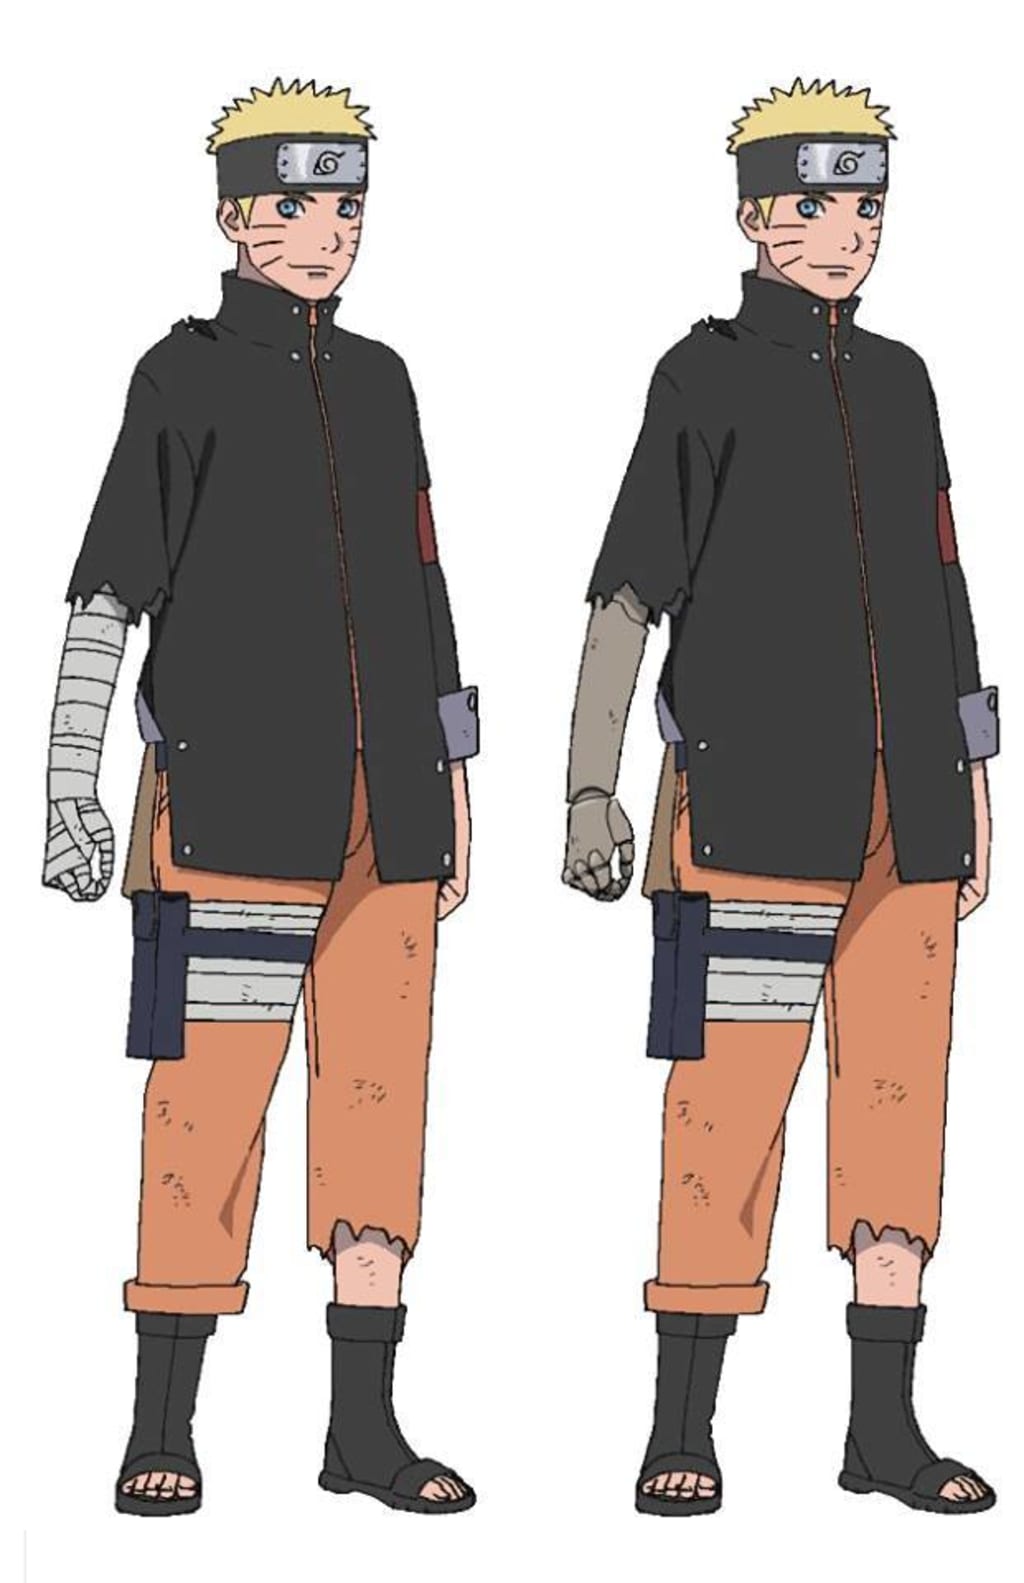 cheryl ann allison recommends Why Does Naruto Have Bandages On His Arm